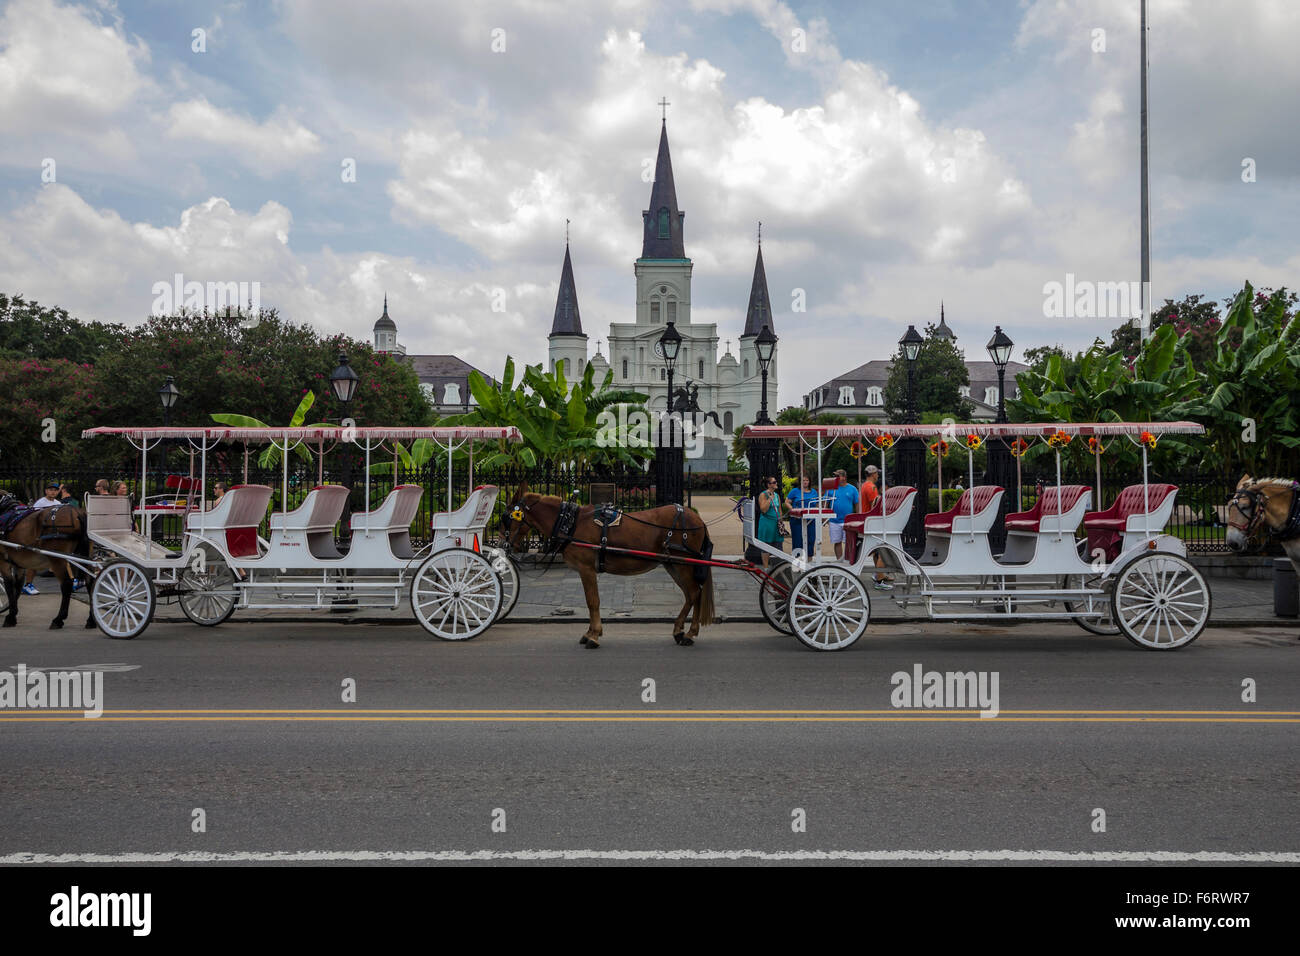 Carriage in front of the castle, New Orleans Stock Photo